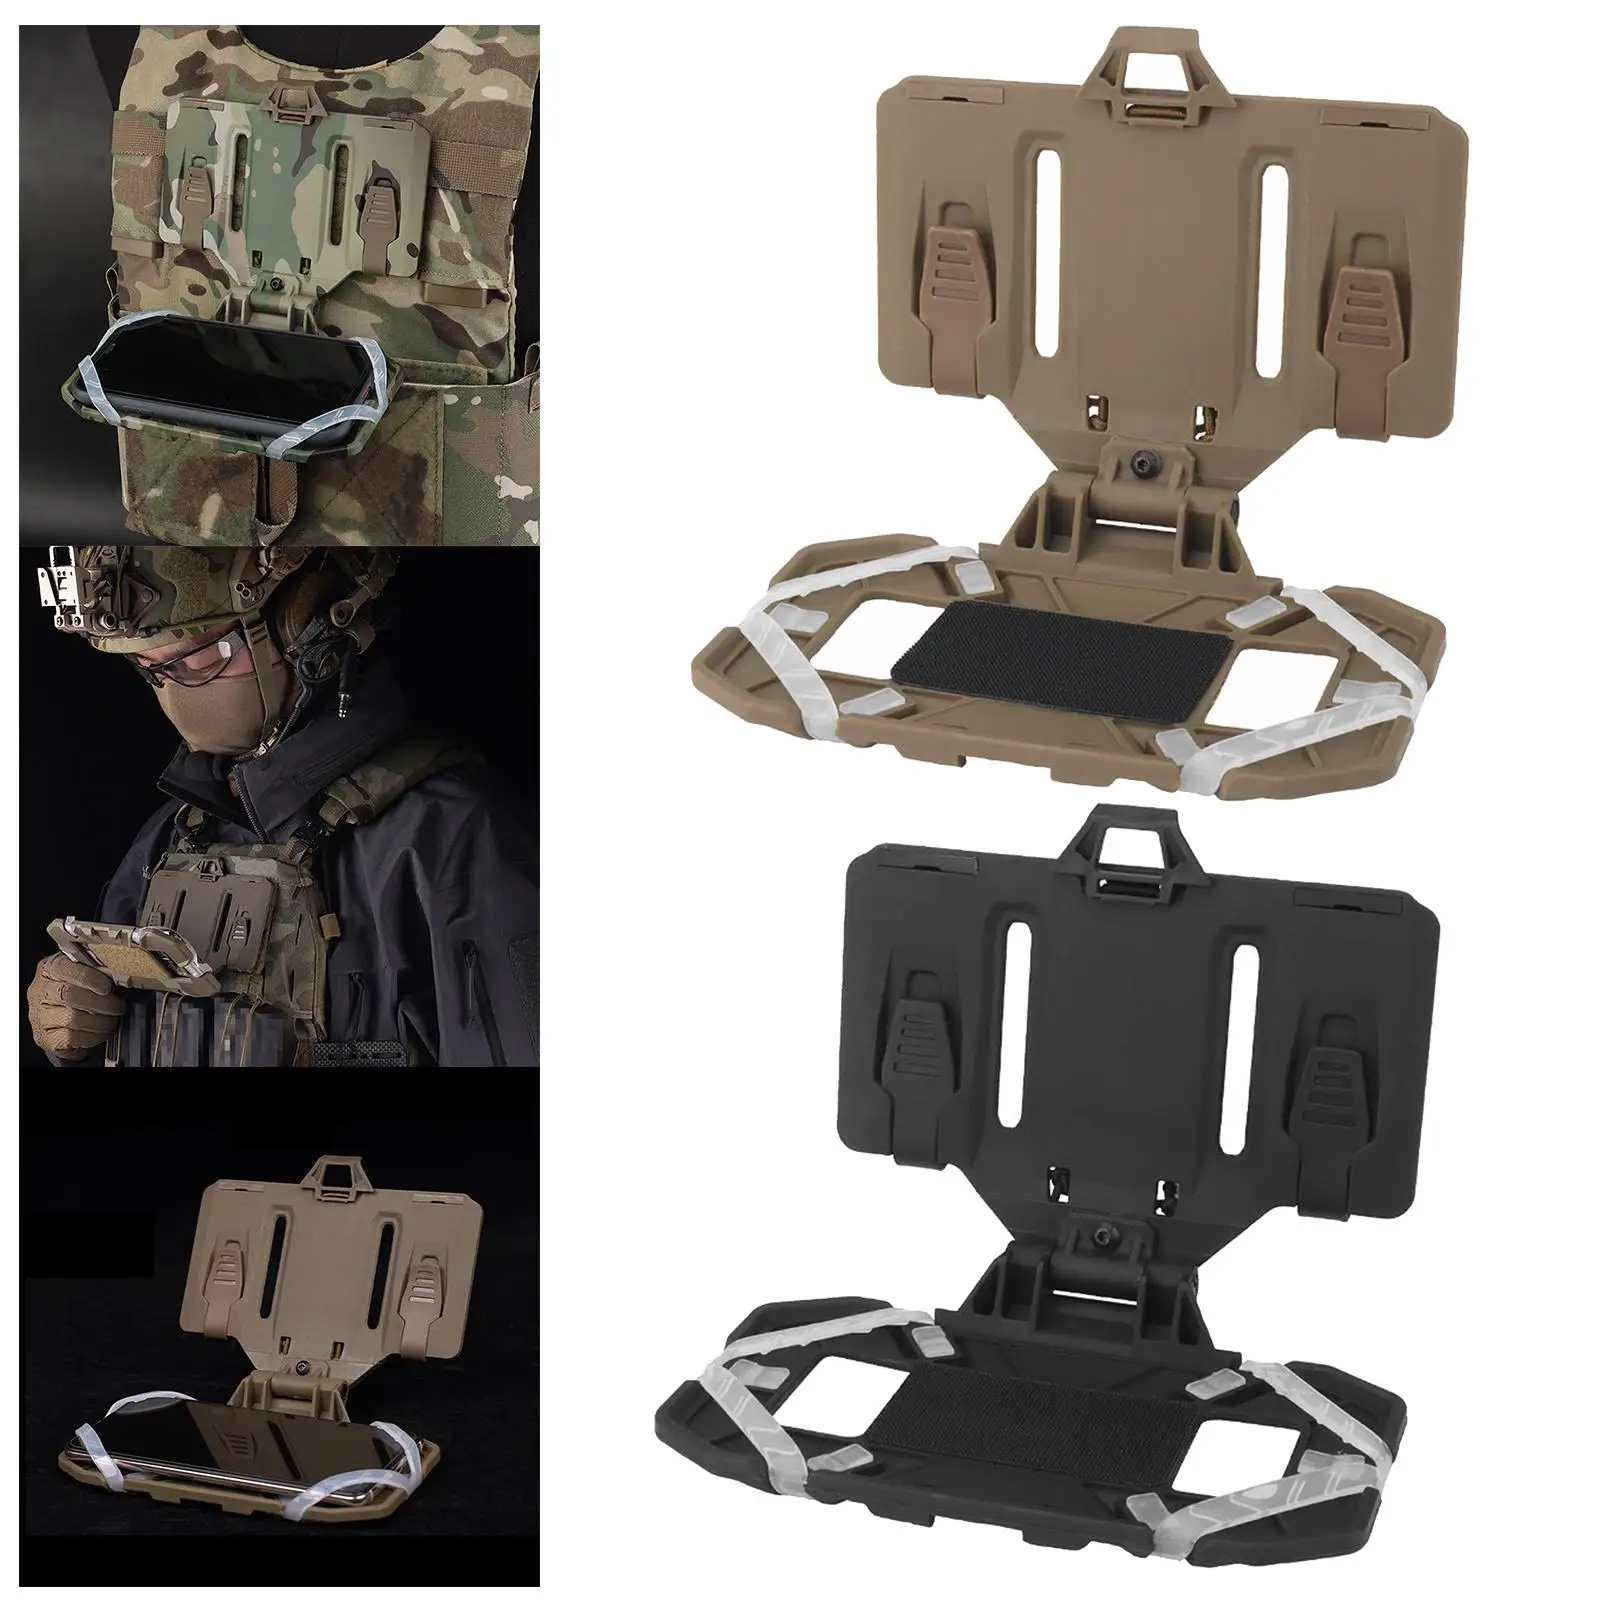 Hunting Vest Phone Board Lightweight Chest Phone Holder Mount Phone Platform for Training Outdoor Sports Shooting Activities